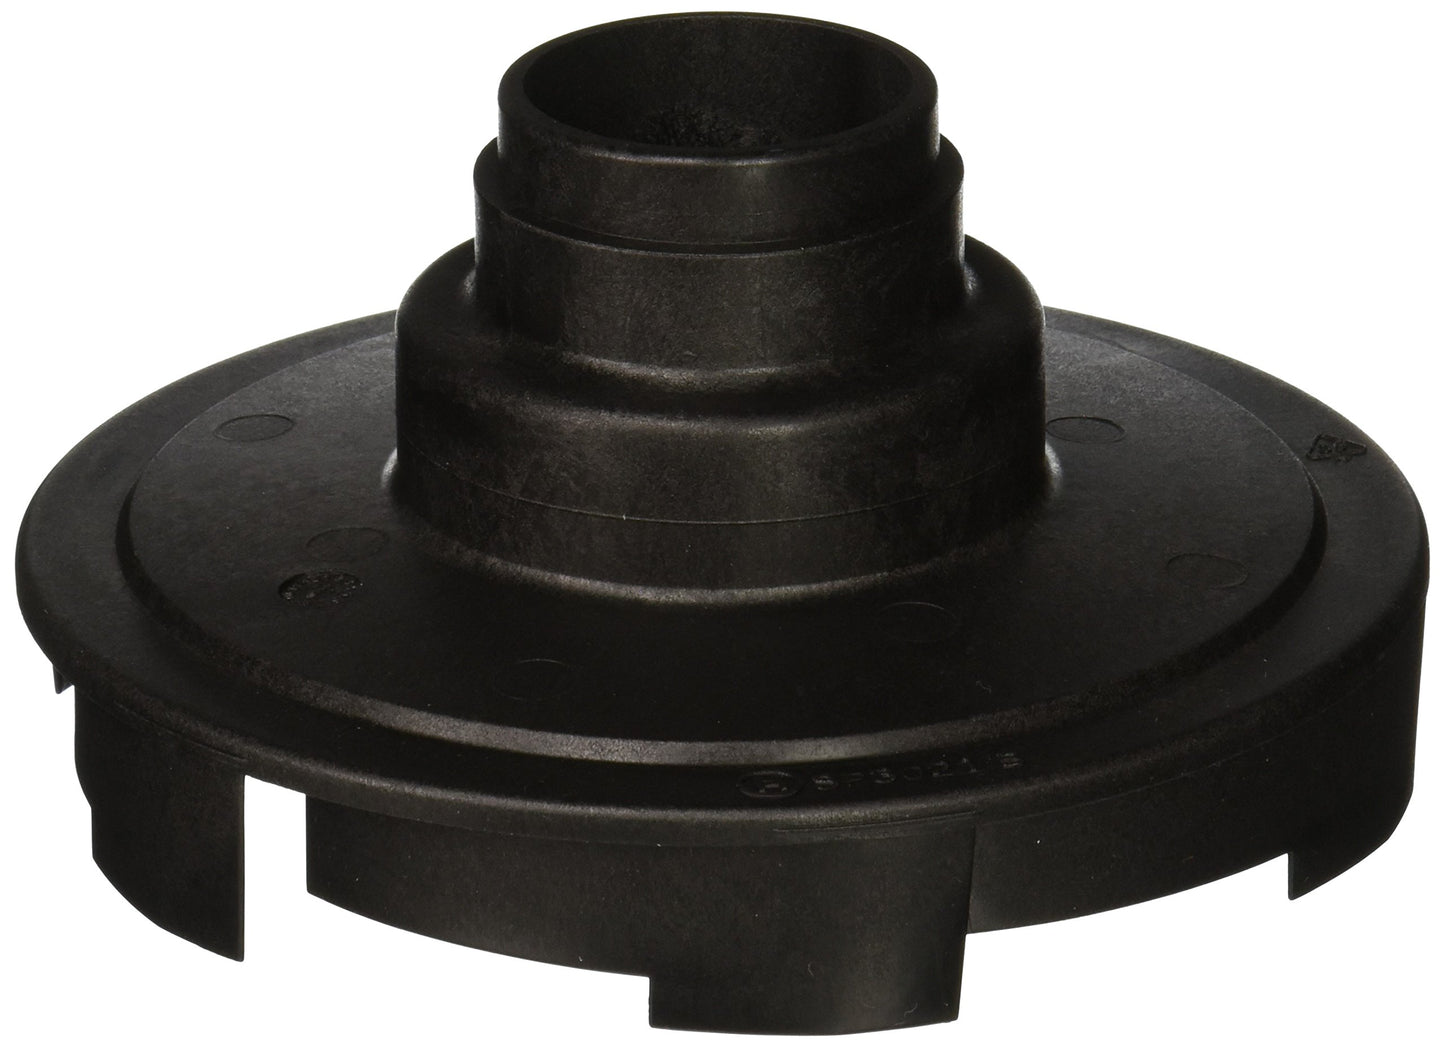 Hayward SPX3021B 2-1/2 and 3-Horsepower Diffuser Replacement for Hayward Super Ii Pump